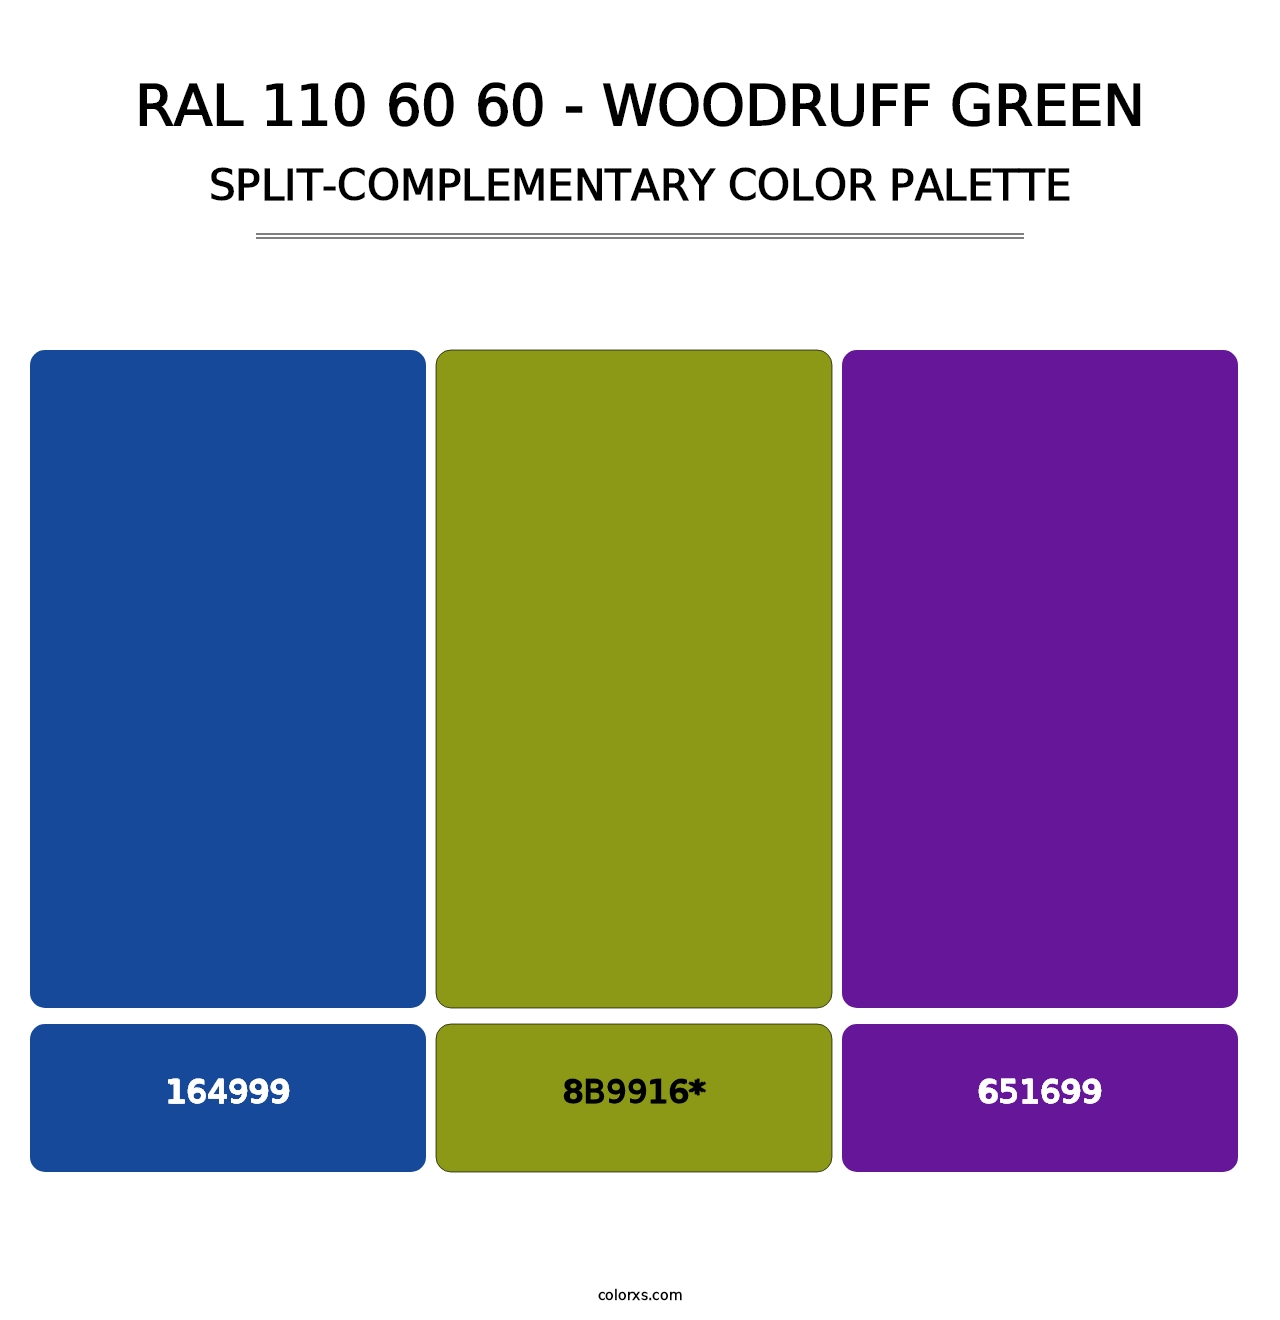 RAL 110 60 60 - Woodruff Green - Split-Complementary Color Palette